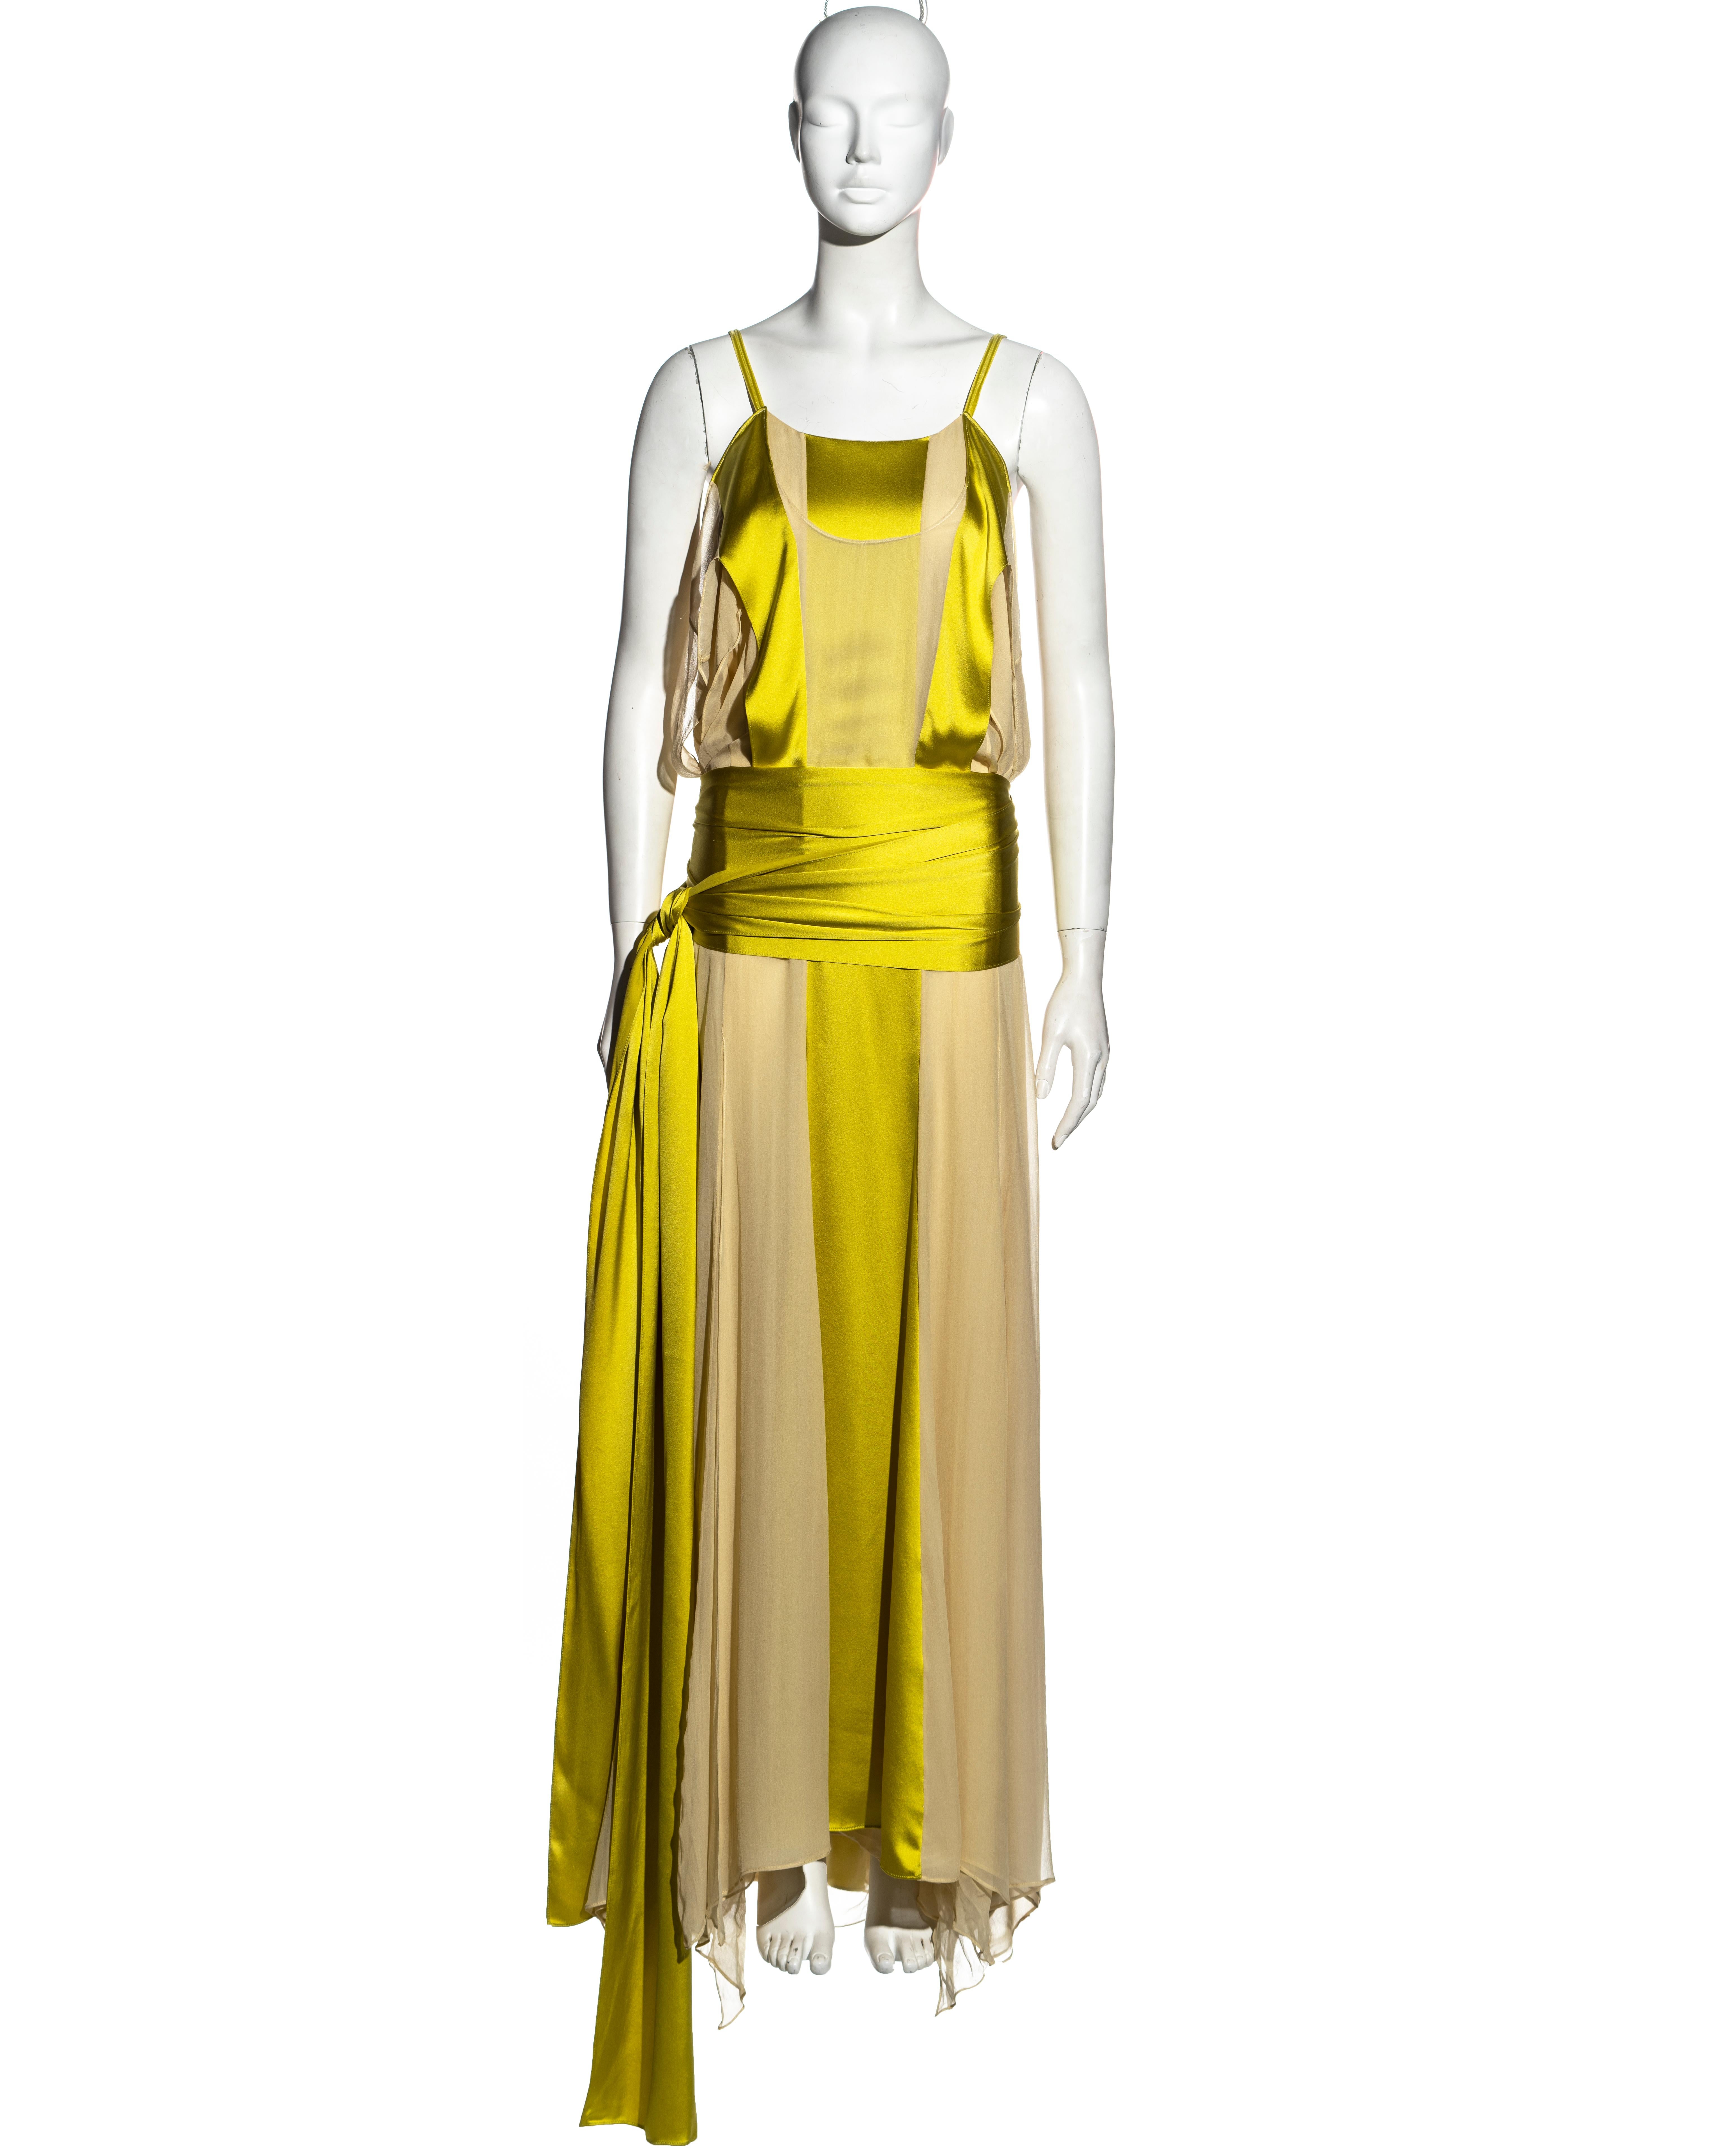 ▪ Yves Saint Laurent chartreuse silk evening dress
▪ Designed by Tom Ford 
▪ Vertical panels of cream chiffon and chartreuse silk 
▪ Two long ties fastening around the hips 
▪ Draped panels at the side body 
▪ Velvet spaghetti straps 
▪ Silk button